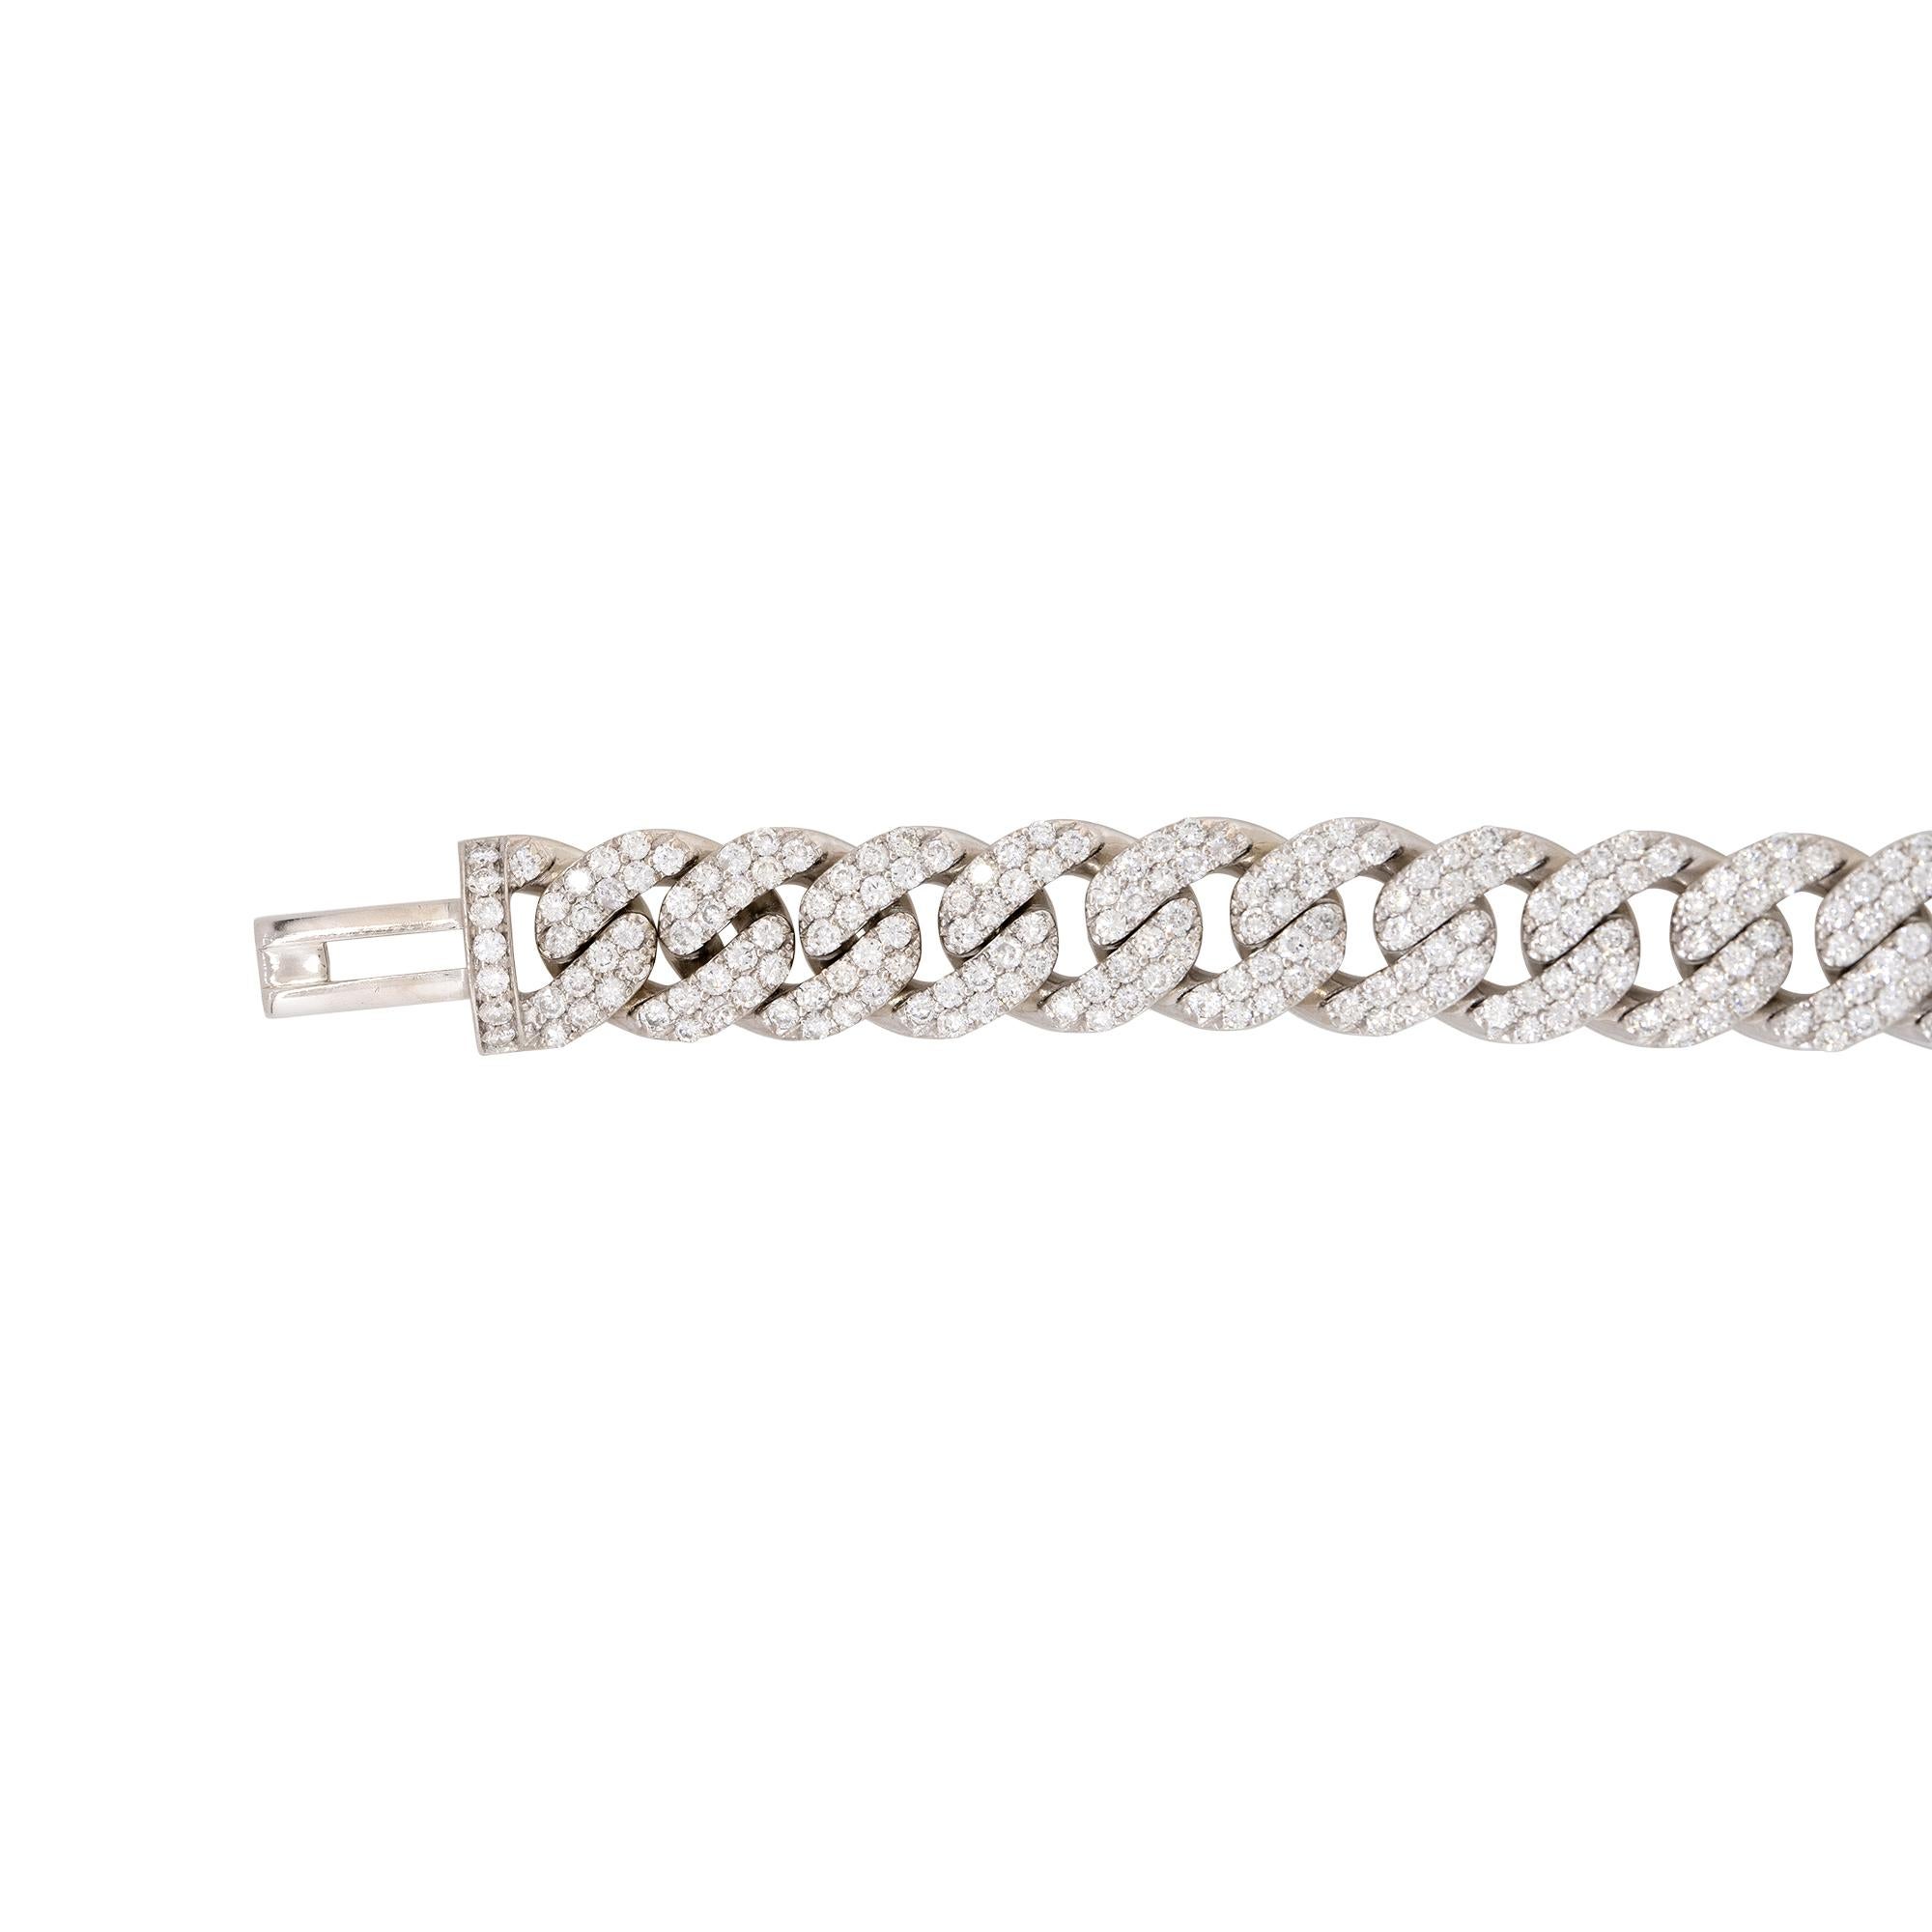 Everyone should take notice of this classic Cuban link bracelet as this particular bracelet is made from 14 karat white gold and is pave set with 7.84 carats of round brilliant cut diamonds that are near colorless. This bracelet measures